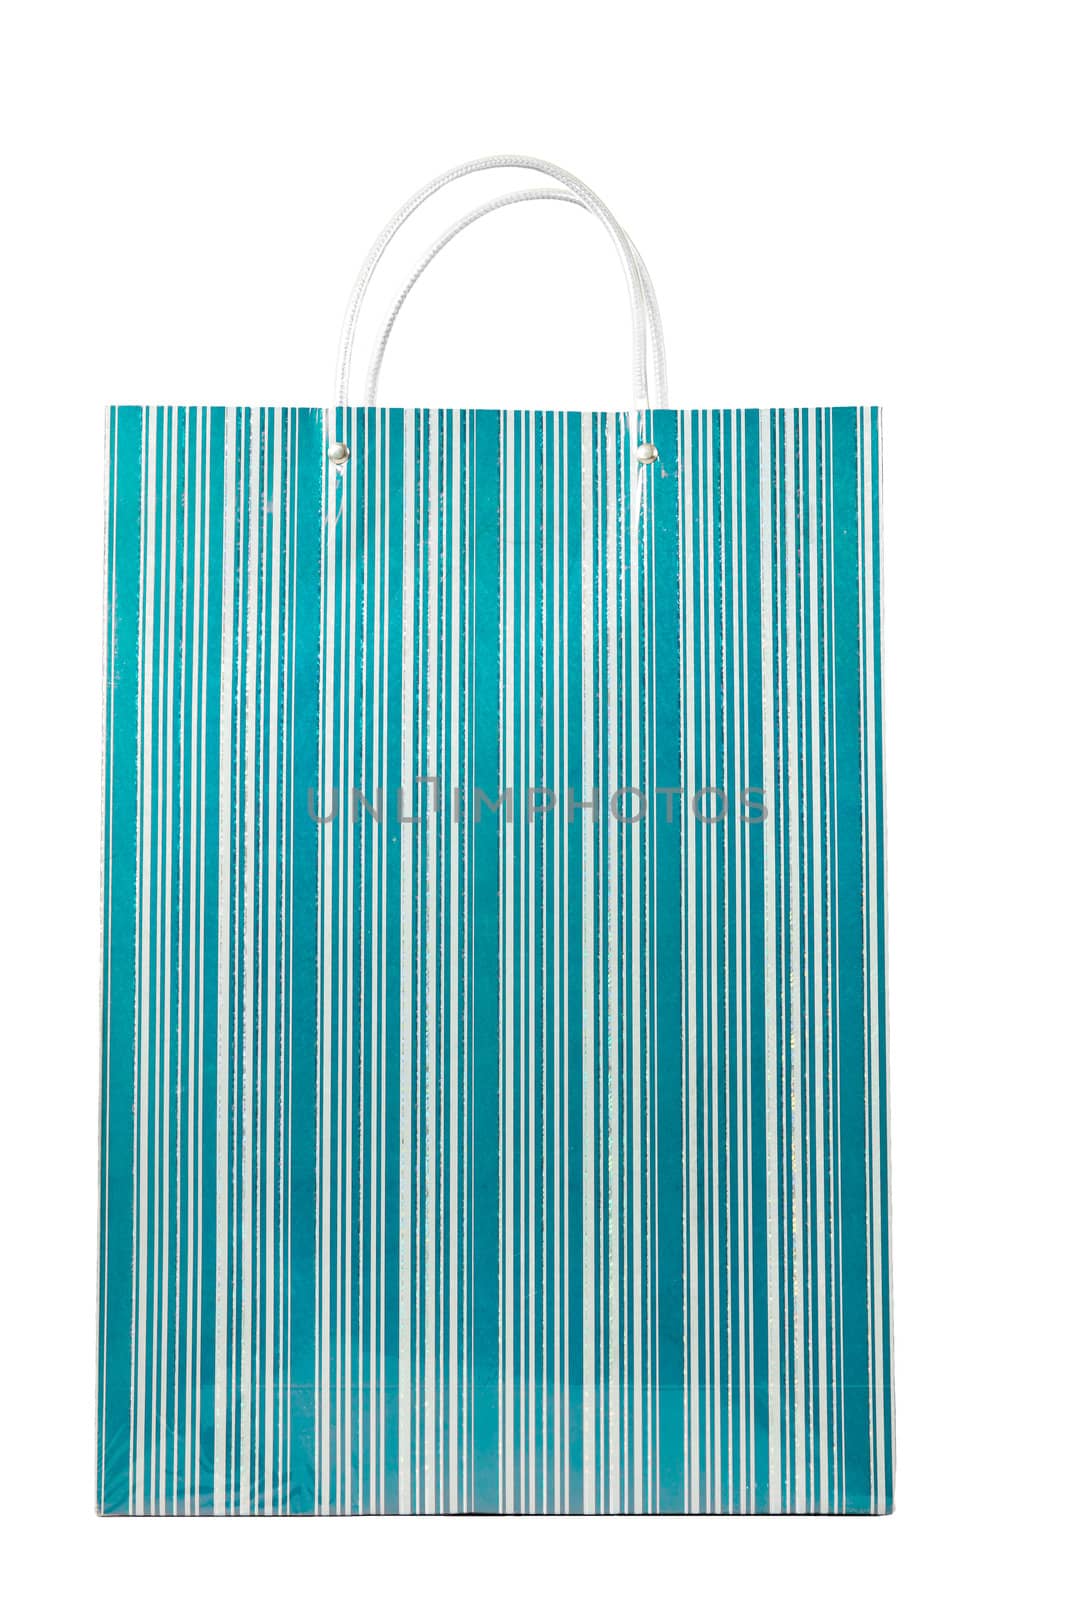 Turquoise shopping bag isolated over white. by Jaykayl